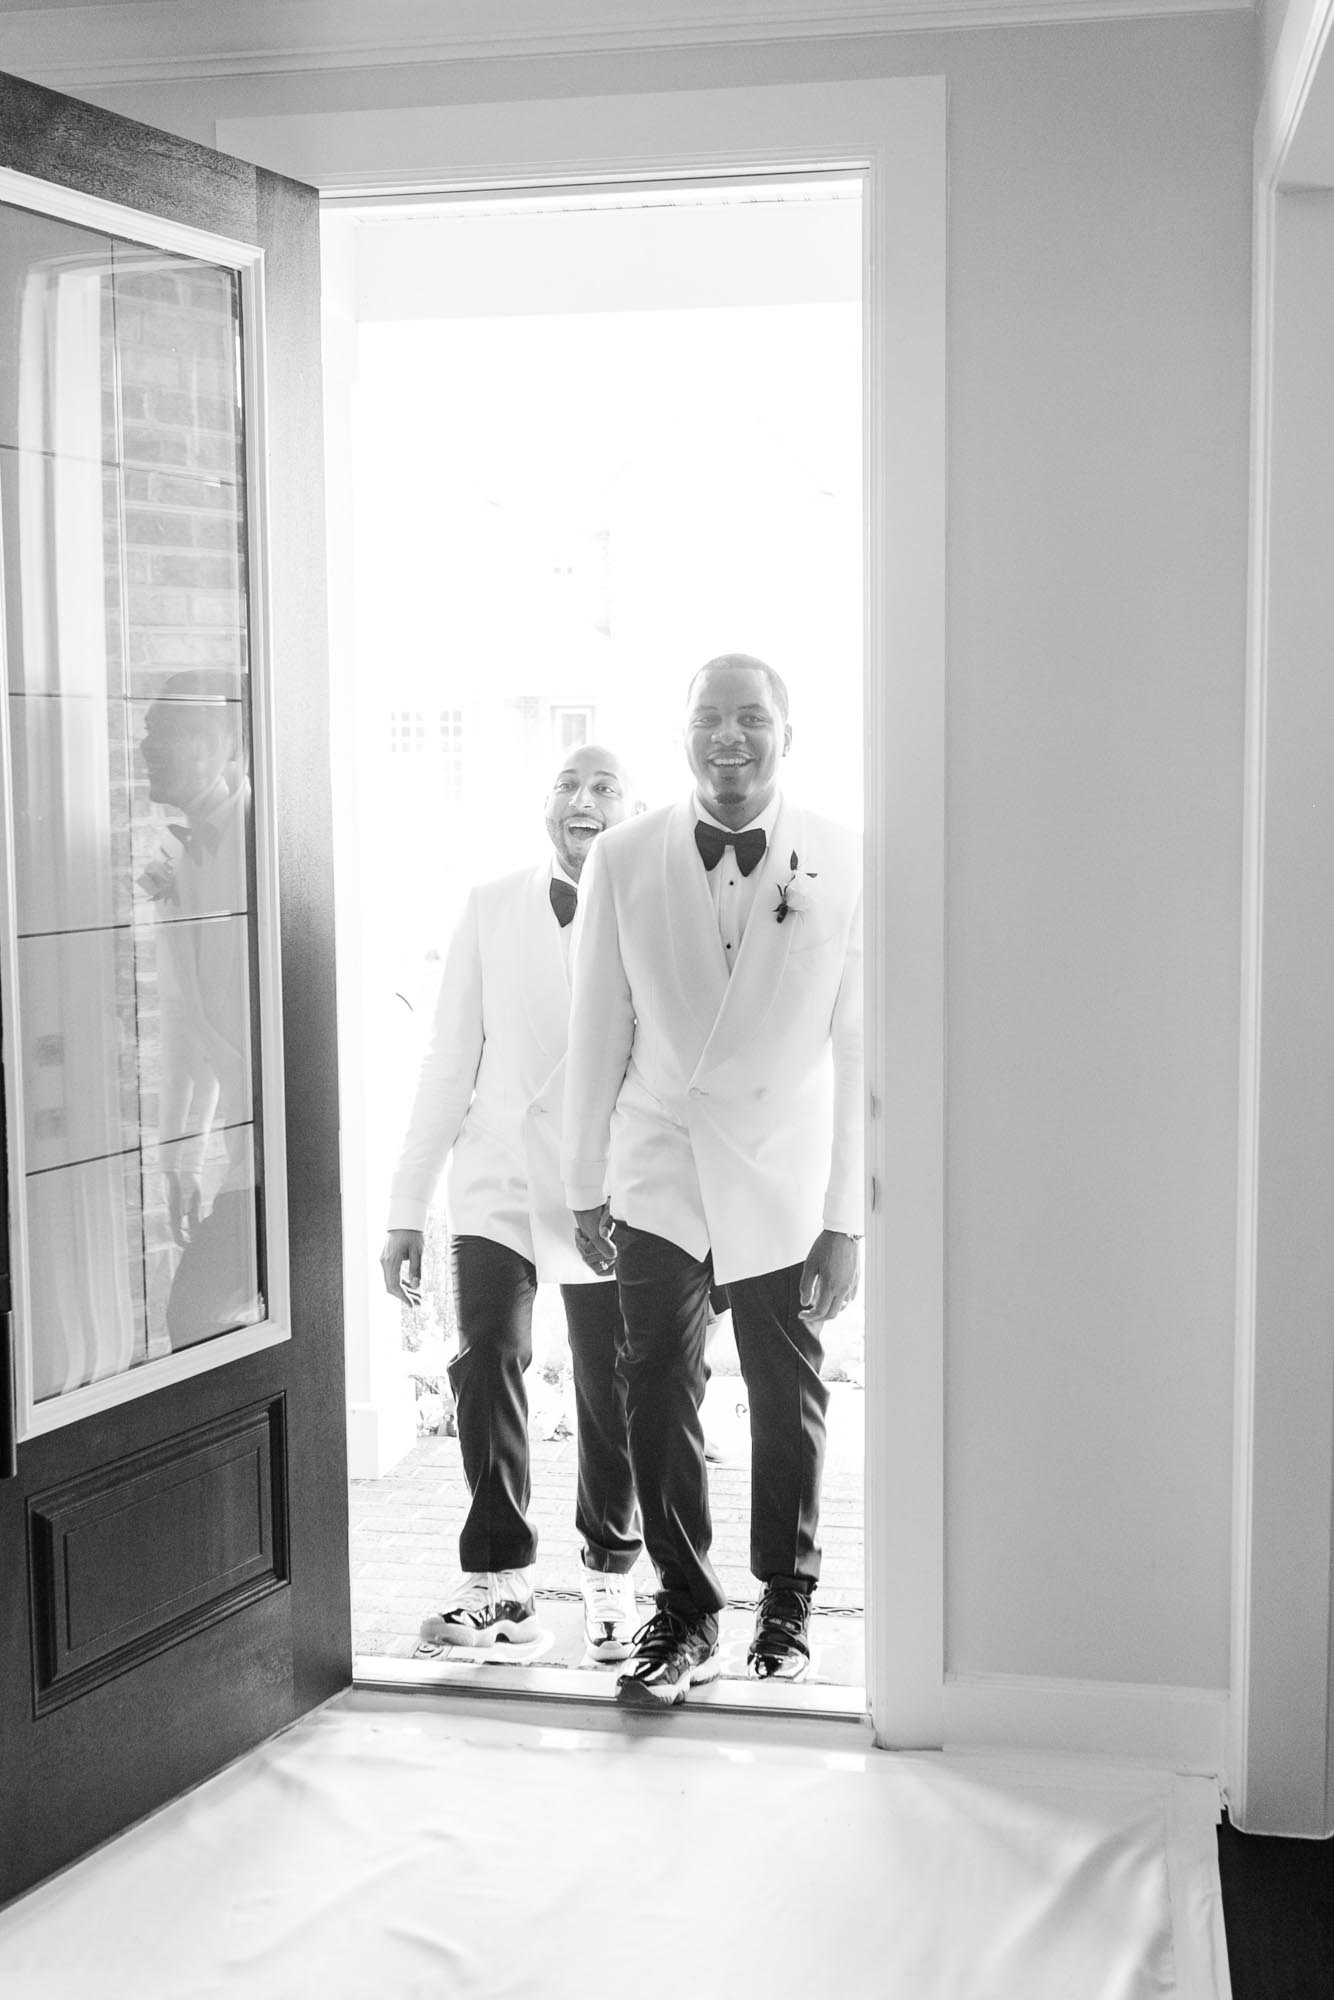 This couple transformed their home into a fabulous wedding venue | Sarandipity Photography | Featured on Equally Wed, the leading LGBTQ+ wedding magazine - grooms, white tuxedo